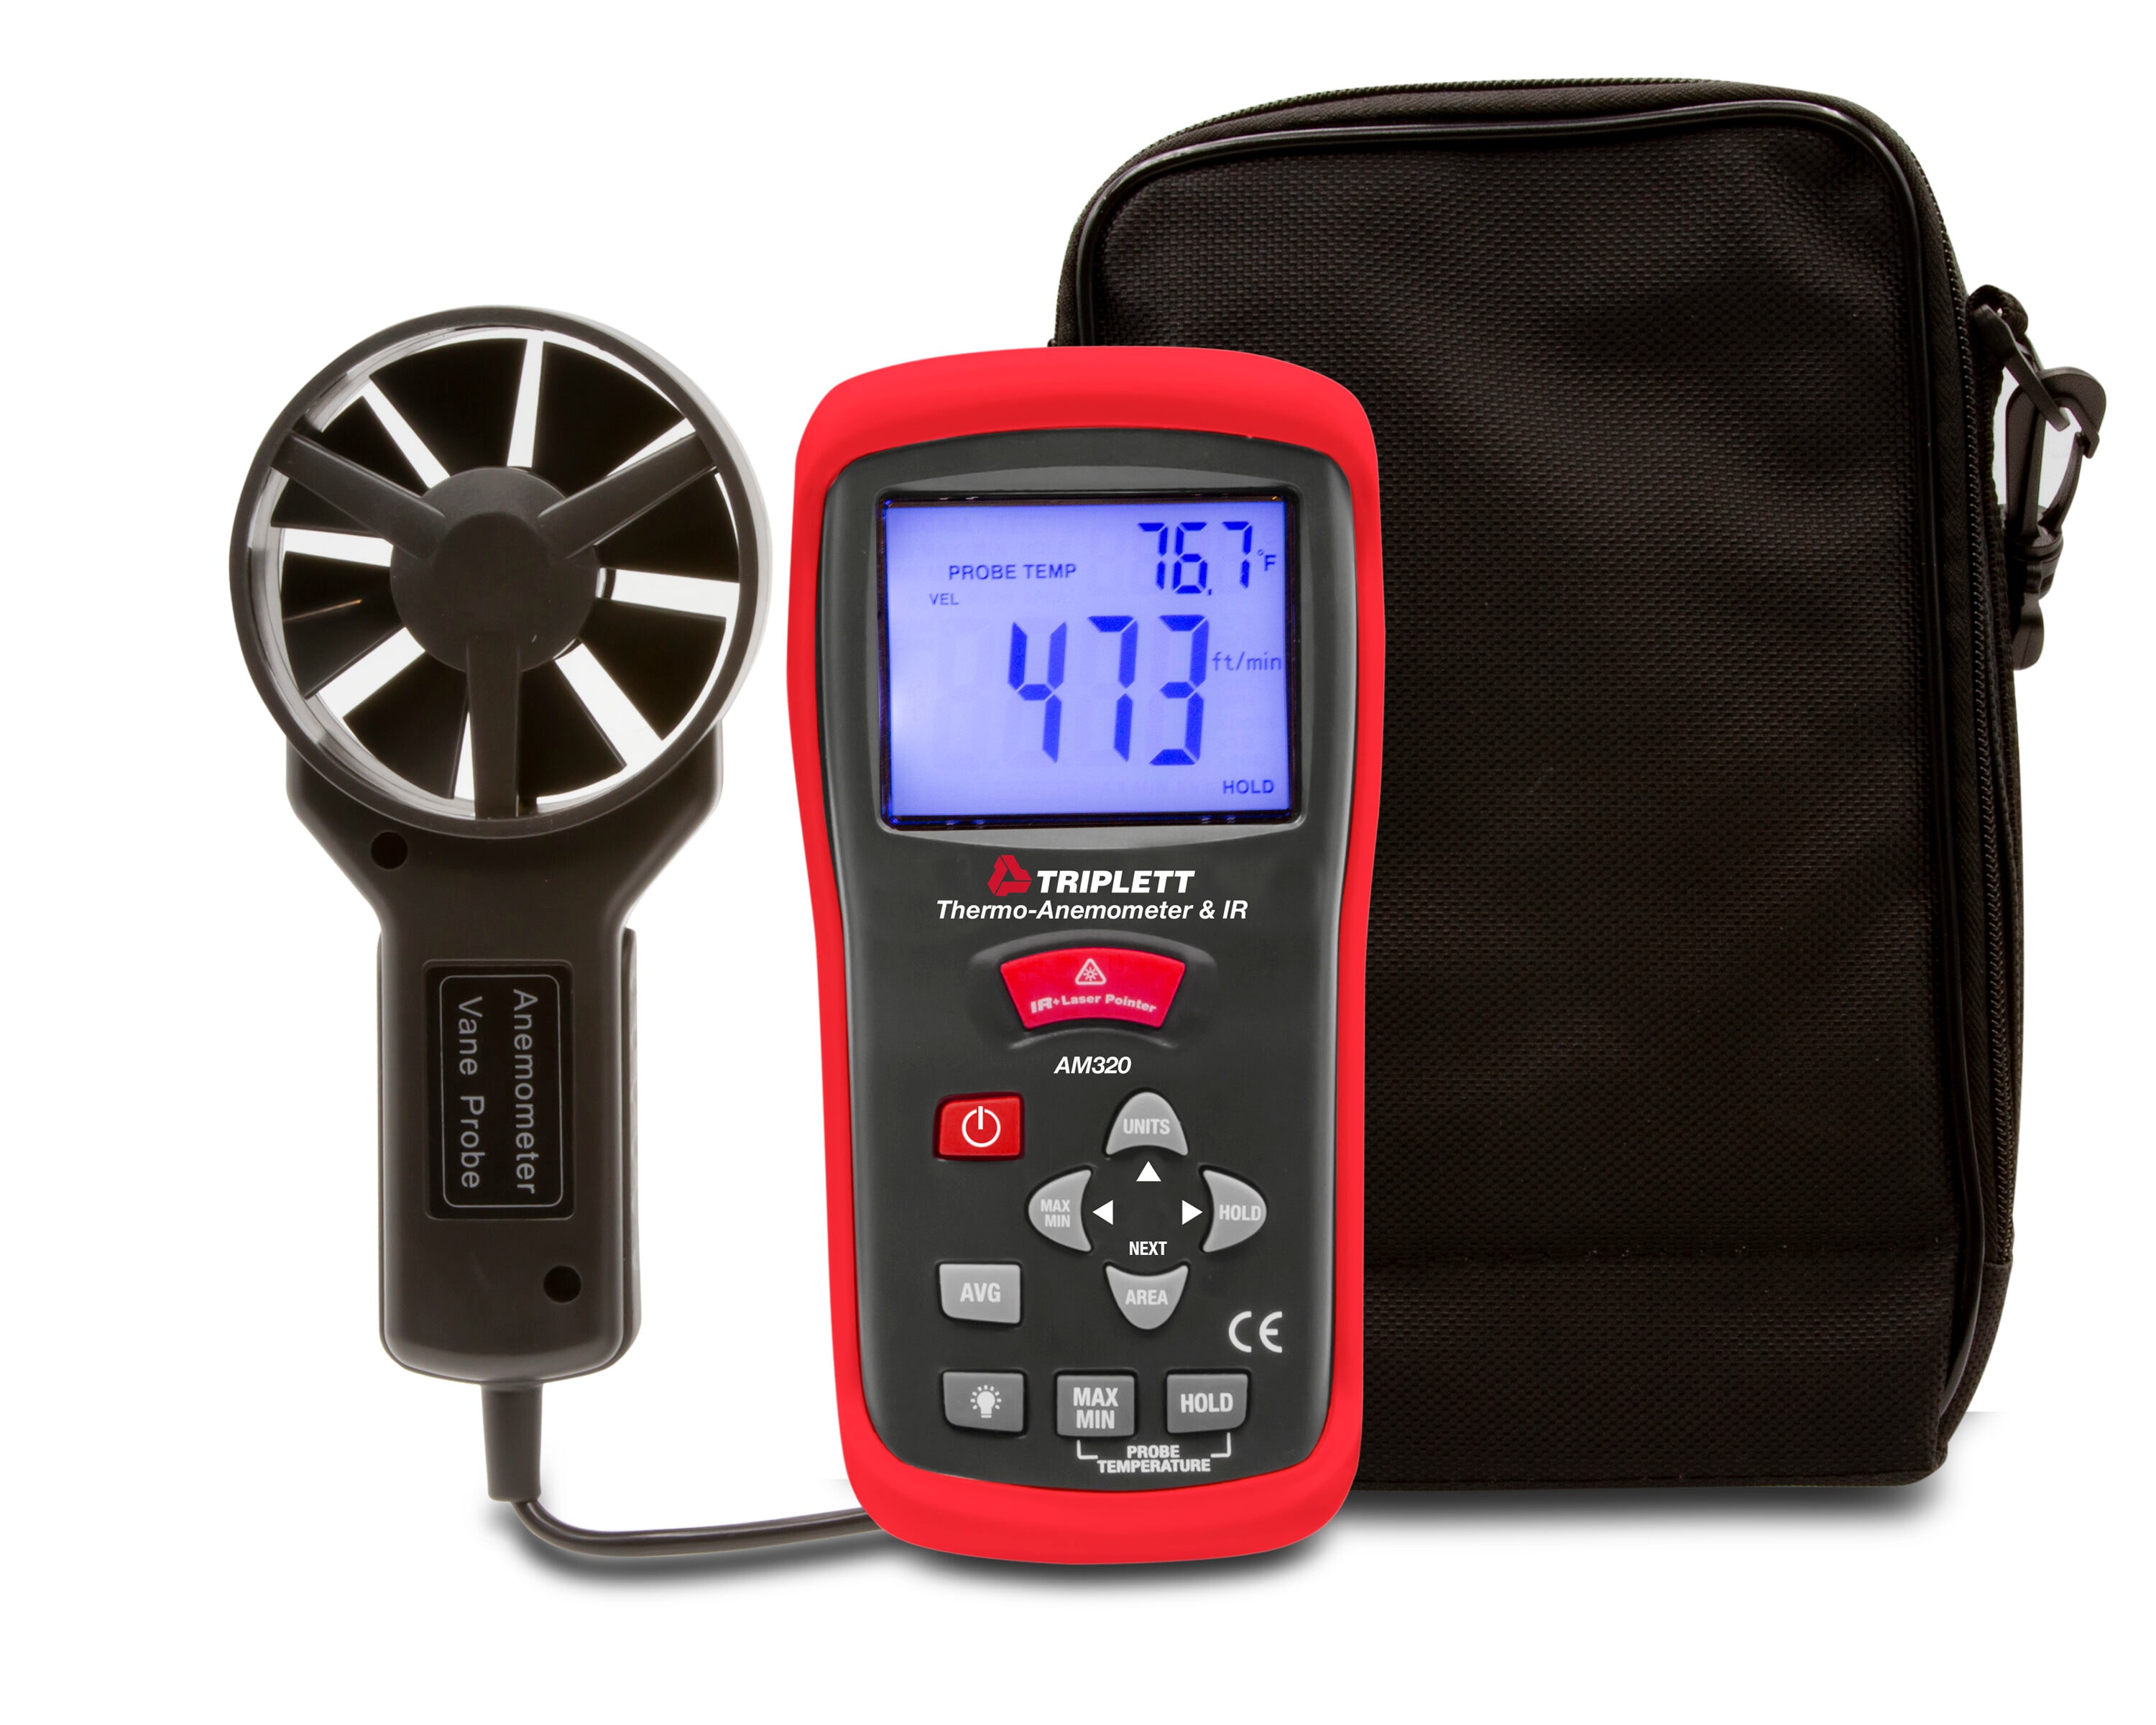 TRIPLETT Non-contact Lcd Tachometer Specialty Meter in the Specialty Meters  department at